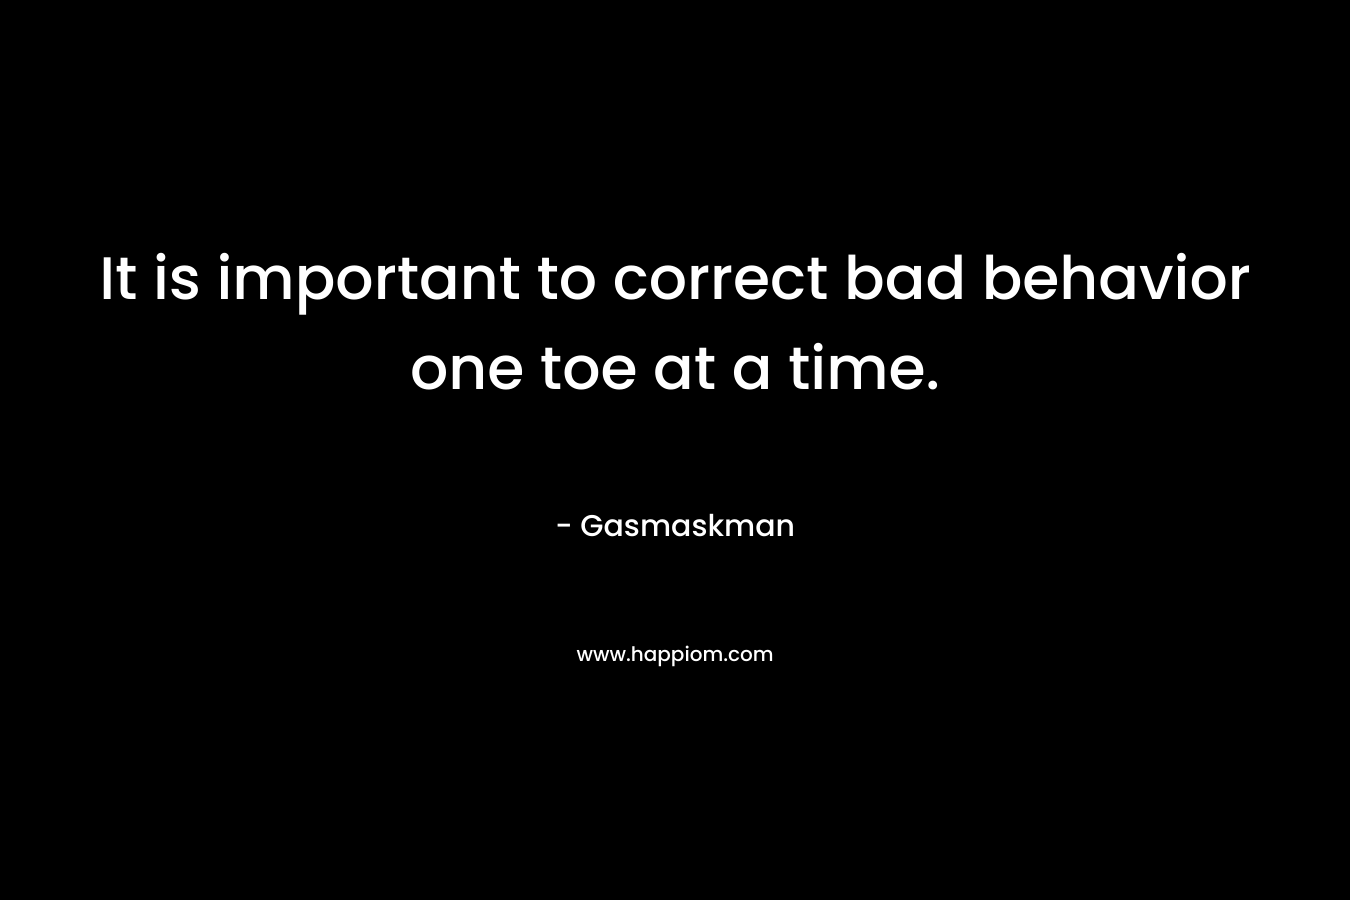 It is important to correct bad behavior one toe at a time. – Gasmaskman